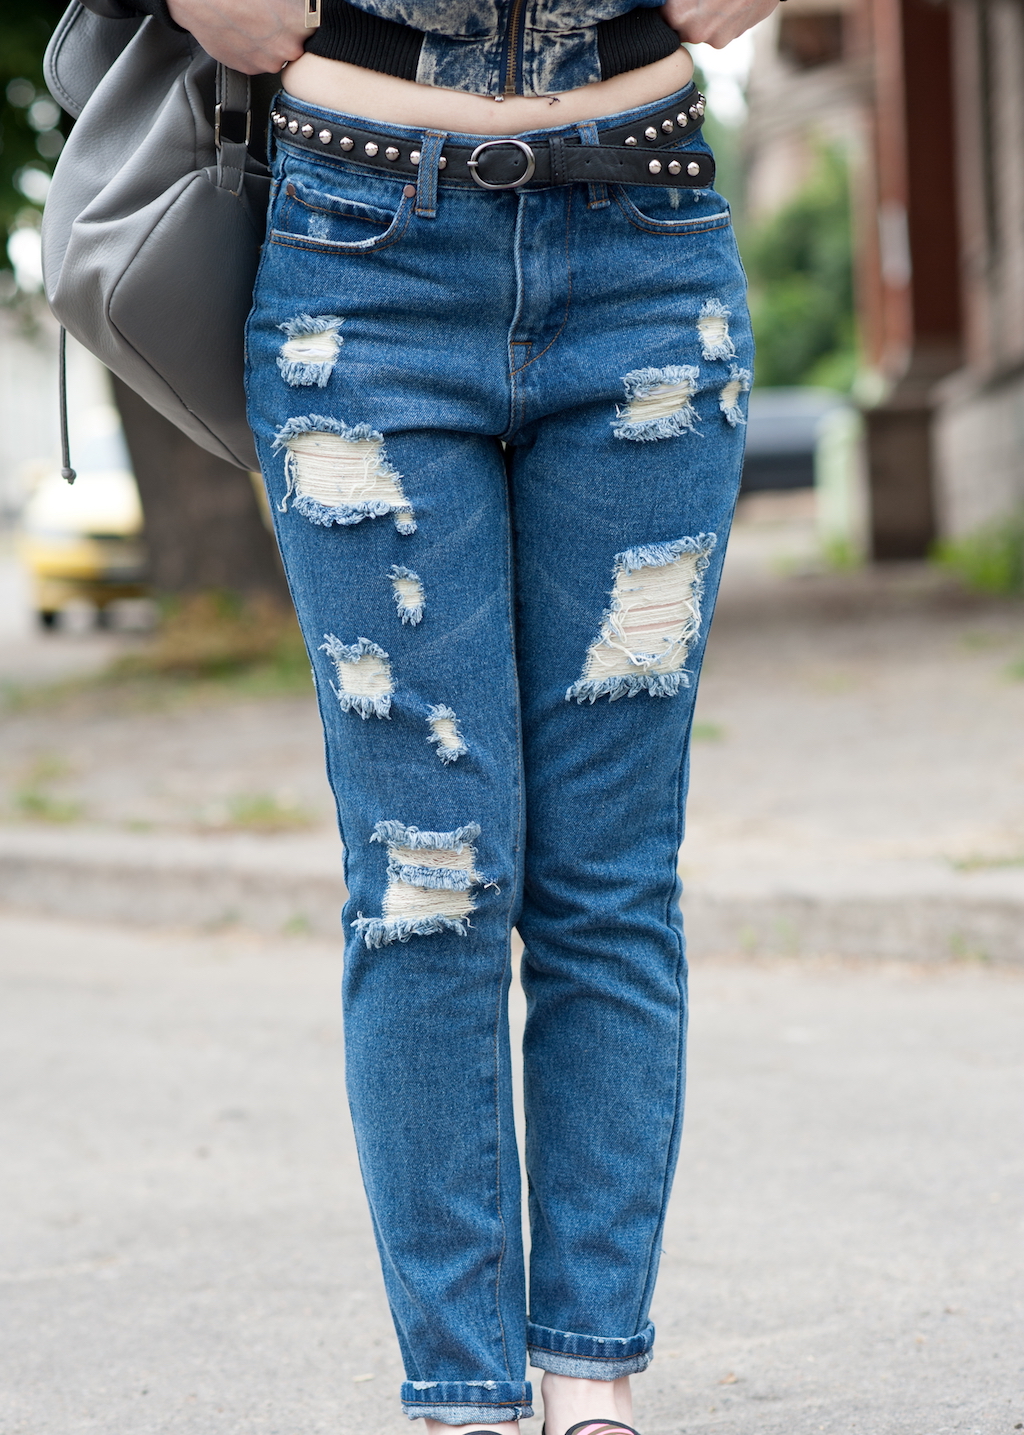 woman wearing ripped jeans, how to dress over 40